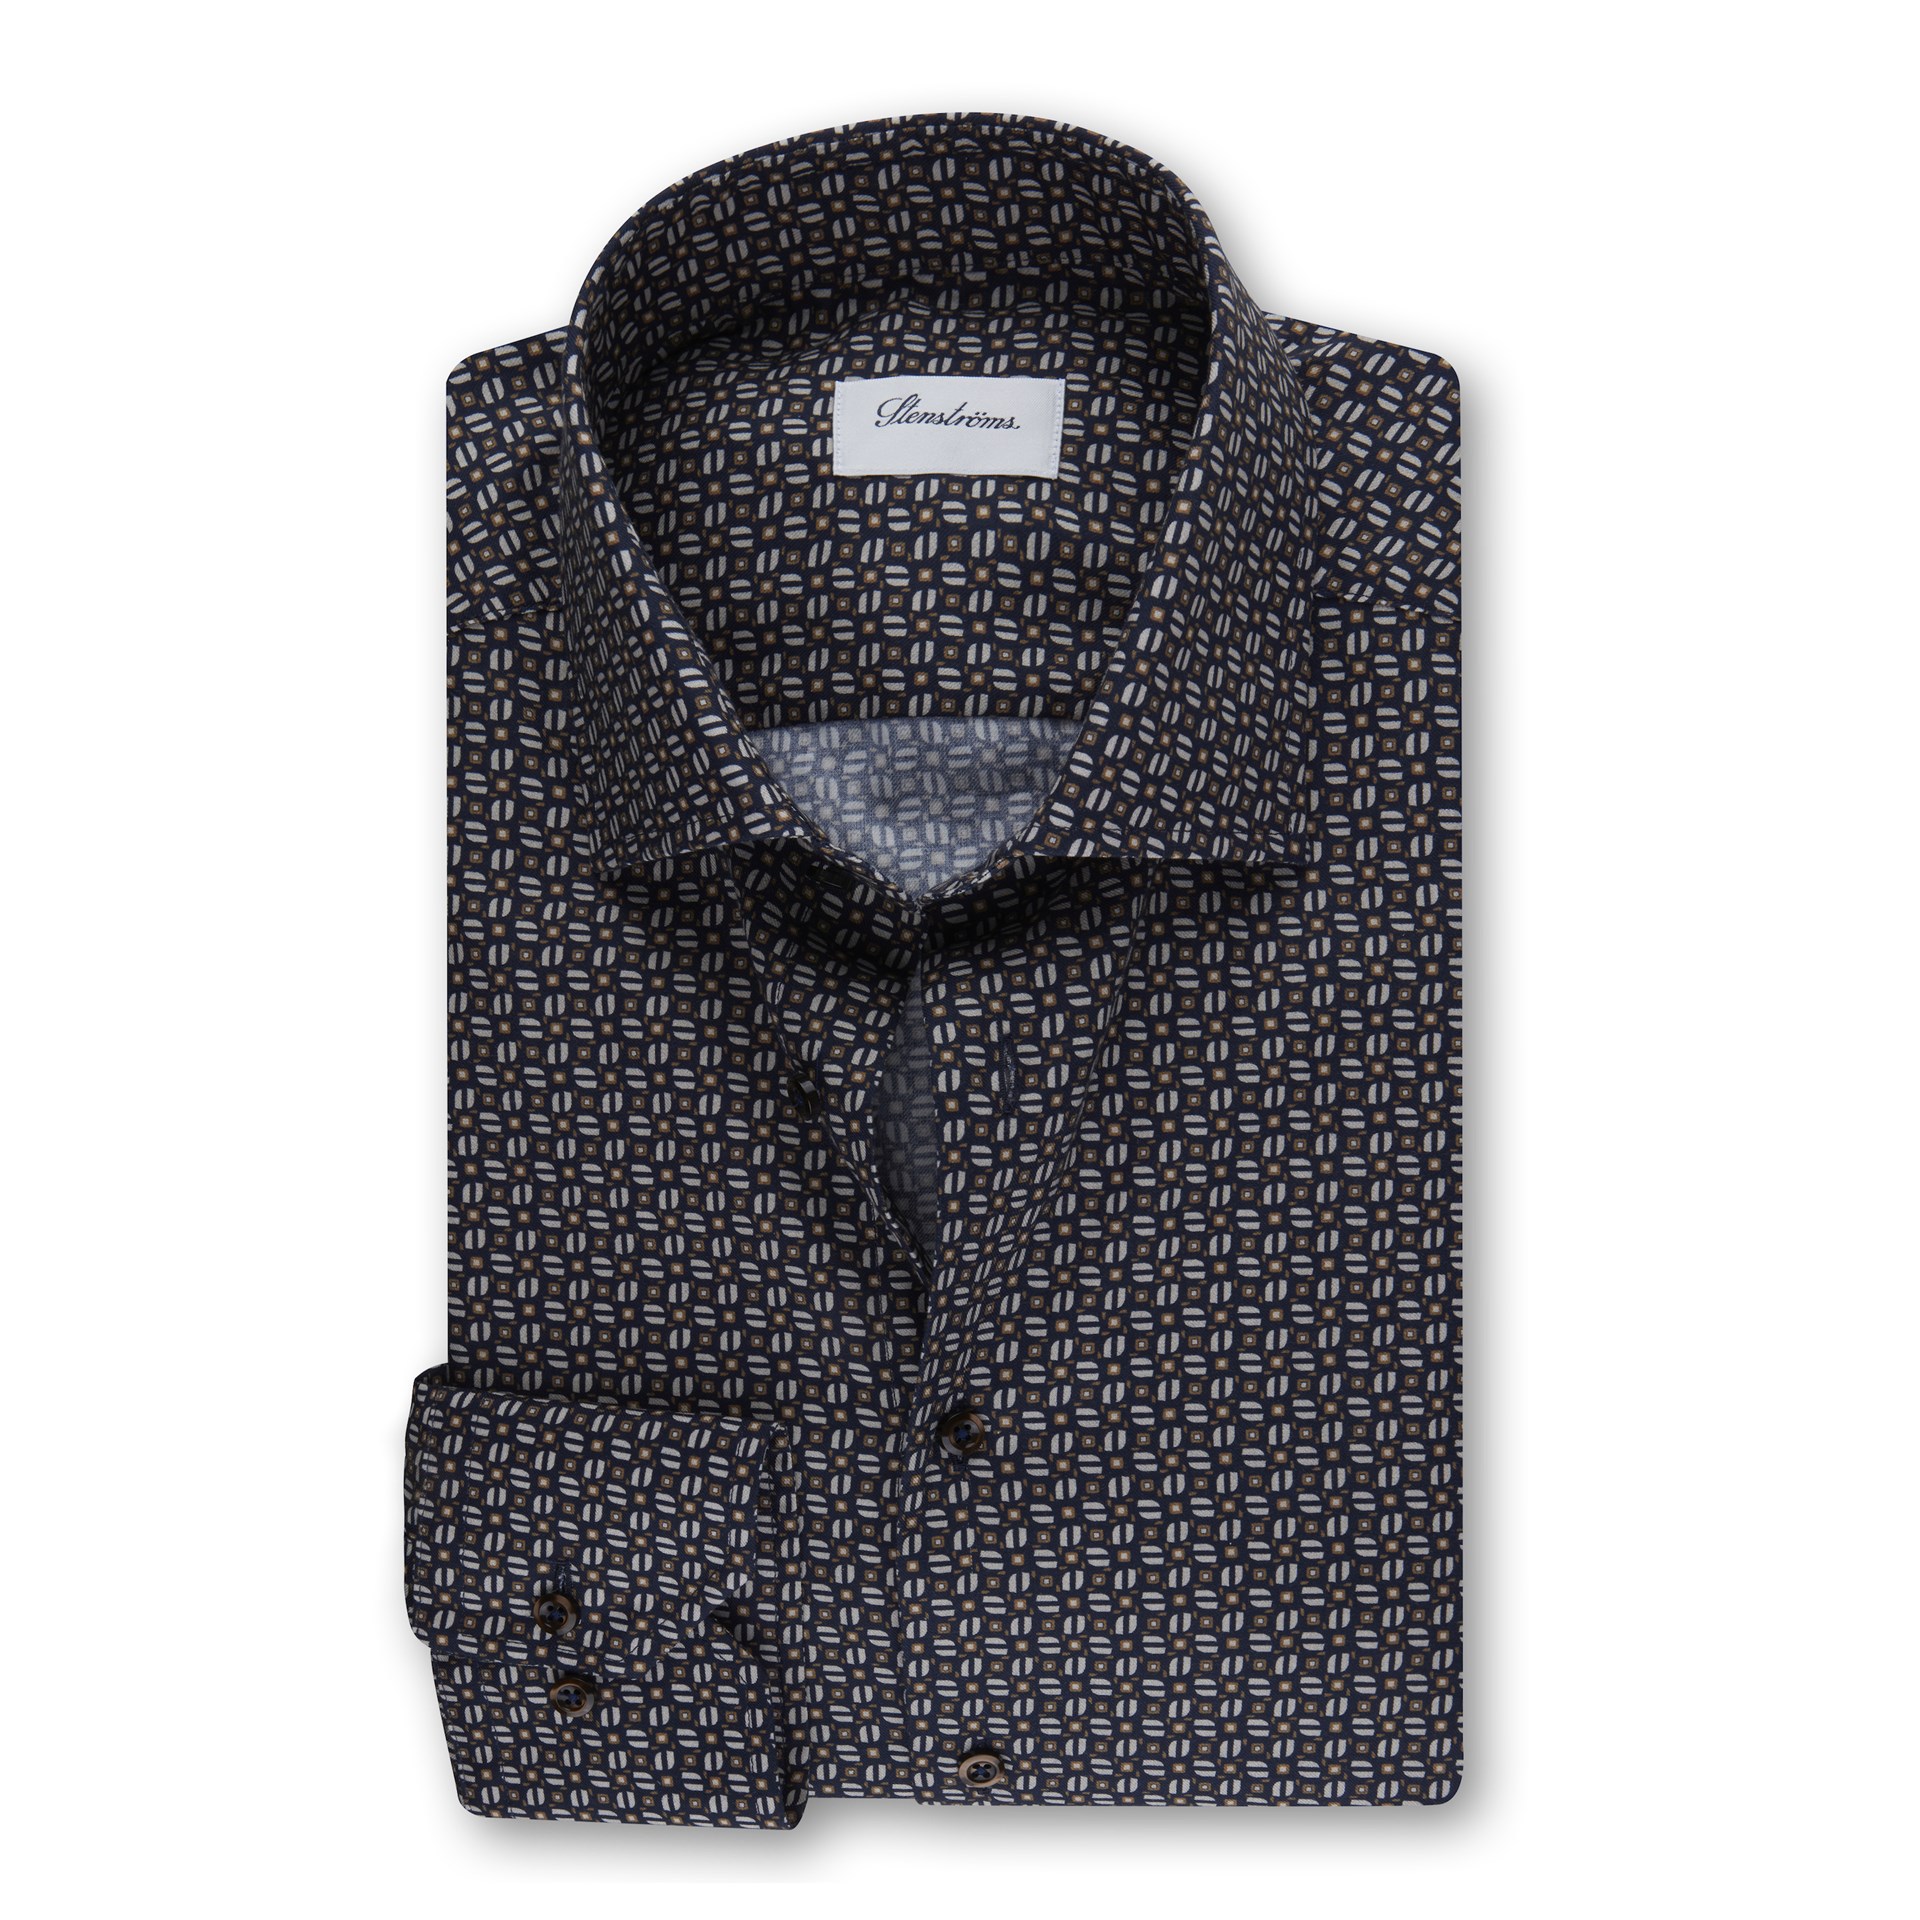 Stenstroms patterned collared shirt